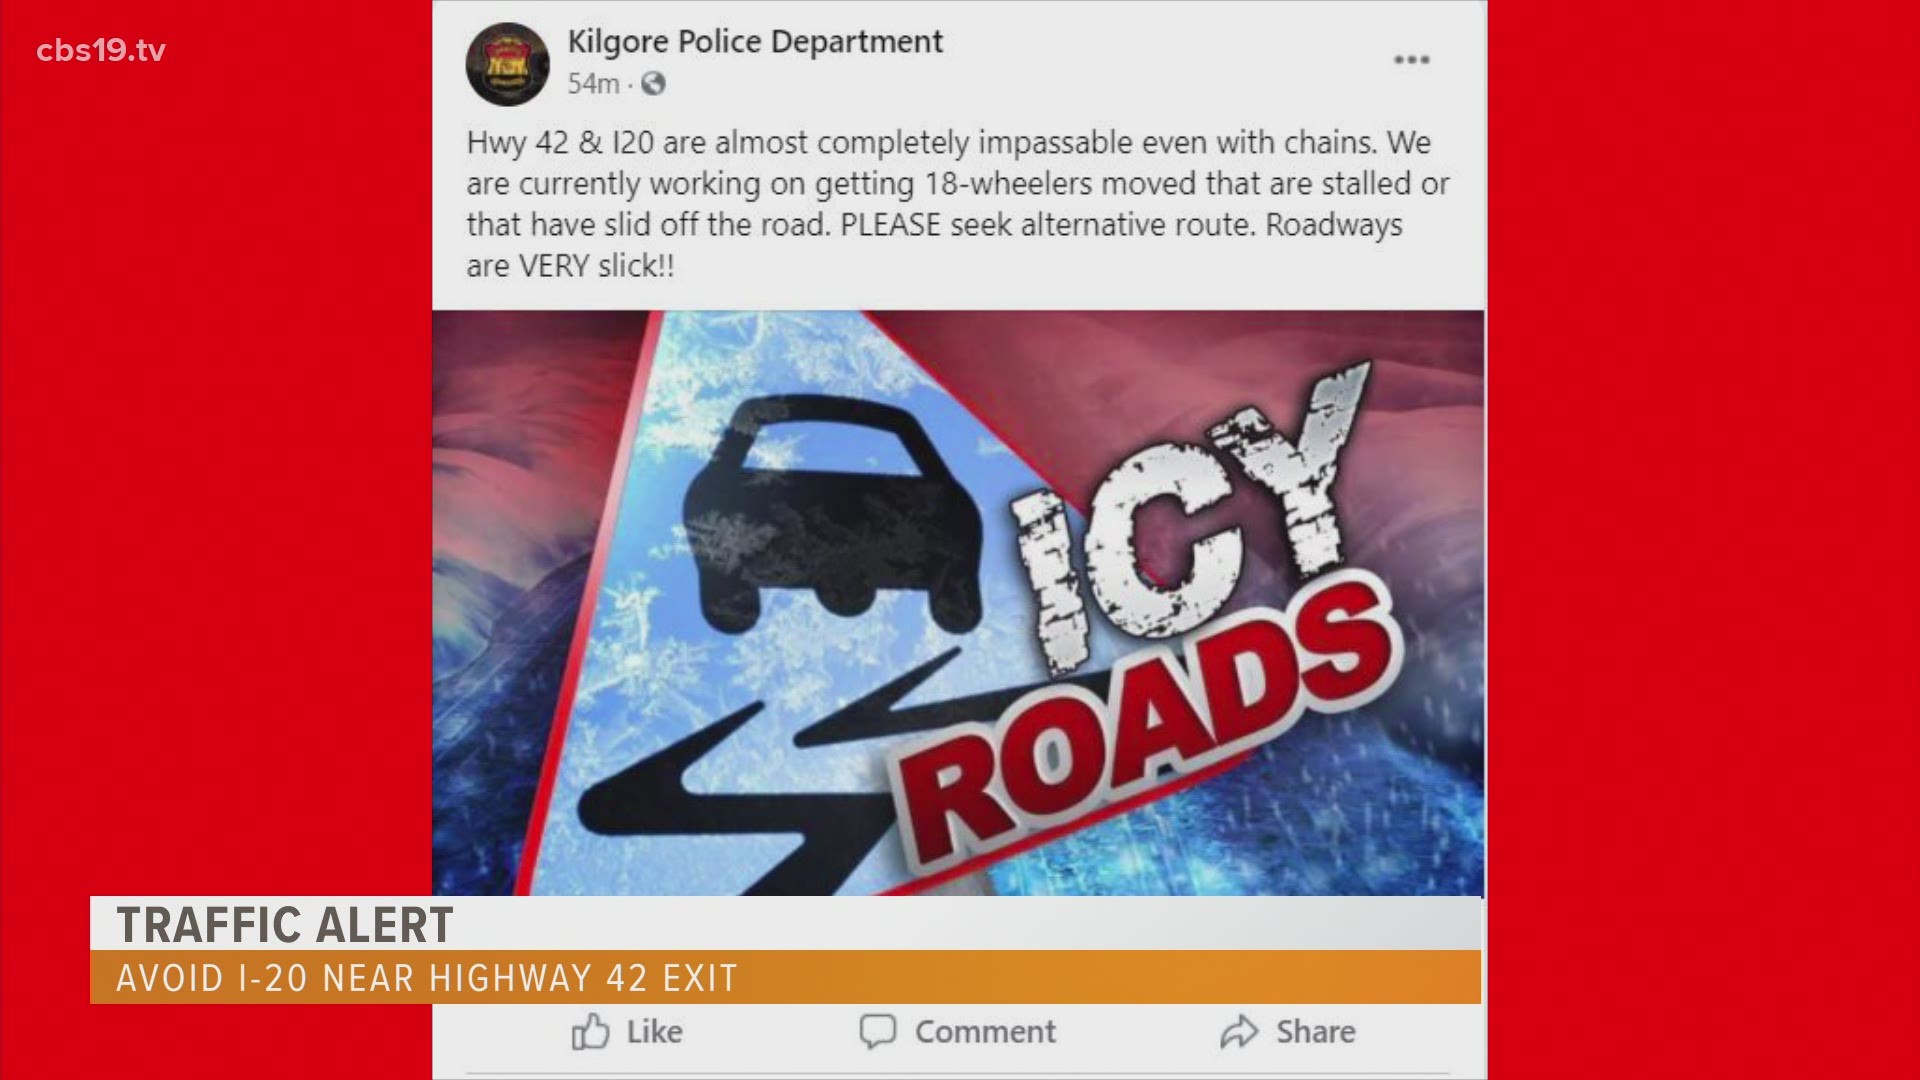 According to the KPD, the area around the Highway 42 exit on I-20 are "almost completely impassable even with chains."